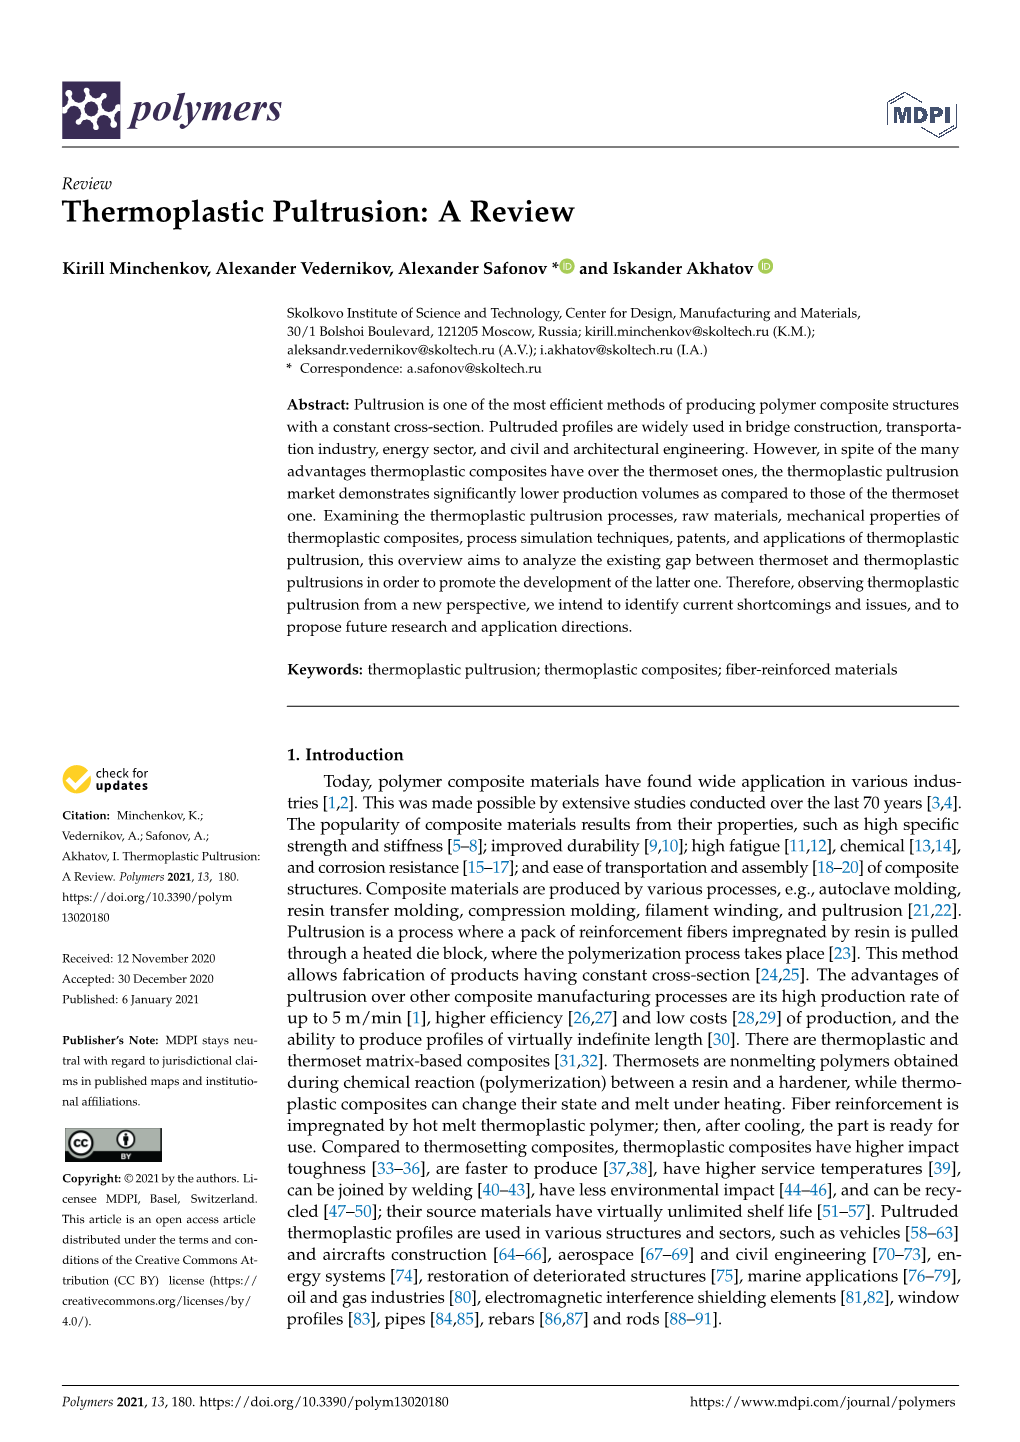 Thermoplastic Pultrusion: a Review